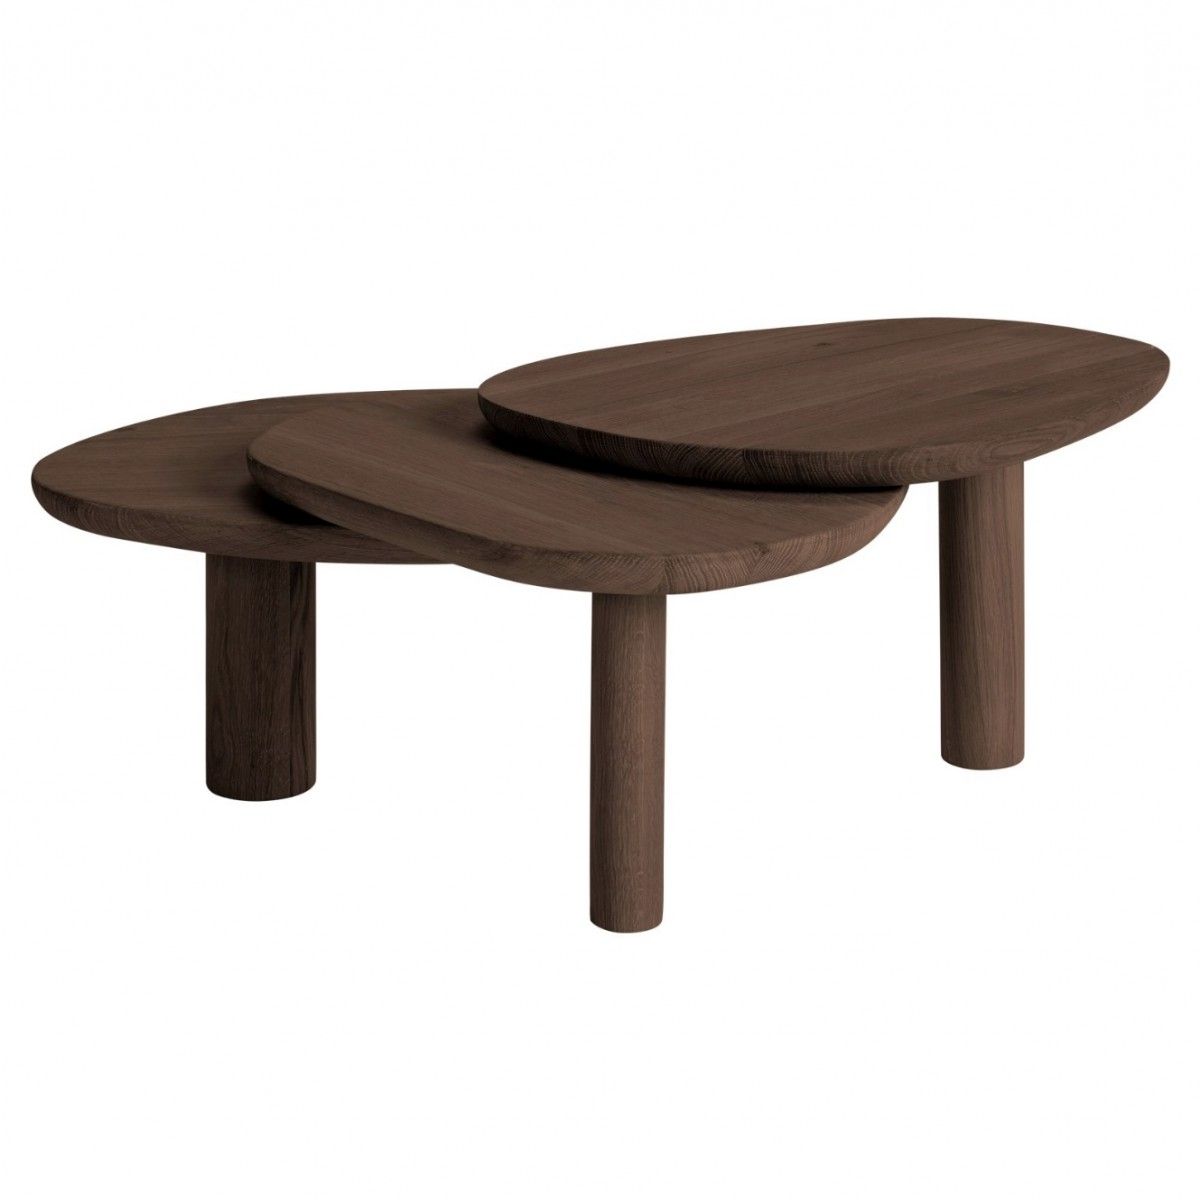 Current Smoked Oak Coffee Tables With Regard To Latch Coffee Table – Bolia At Colonel Shop (View 4 of 20)